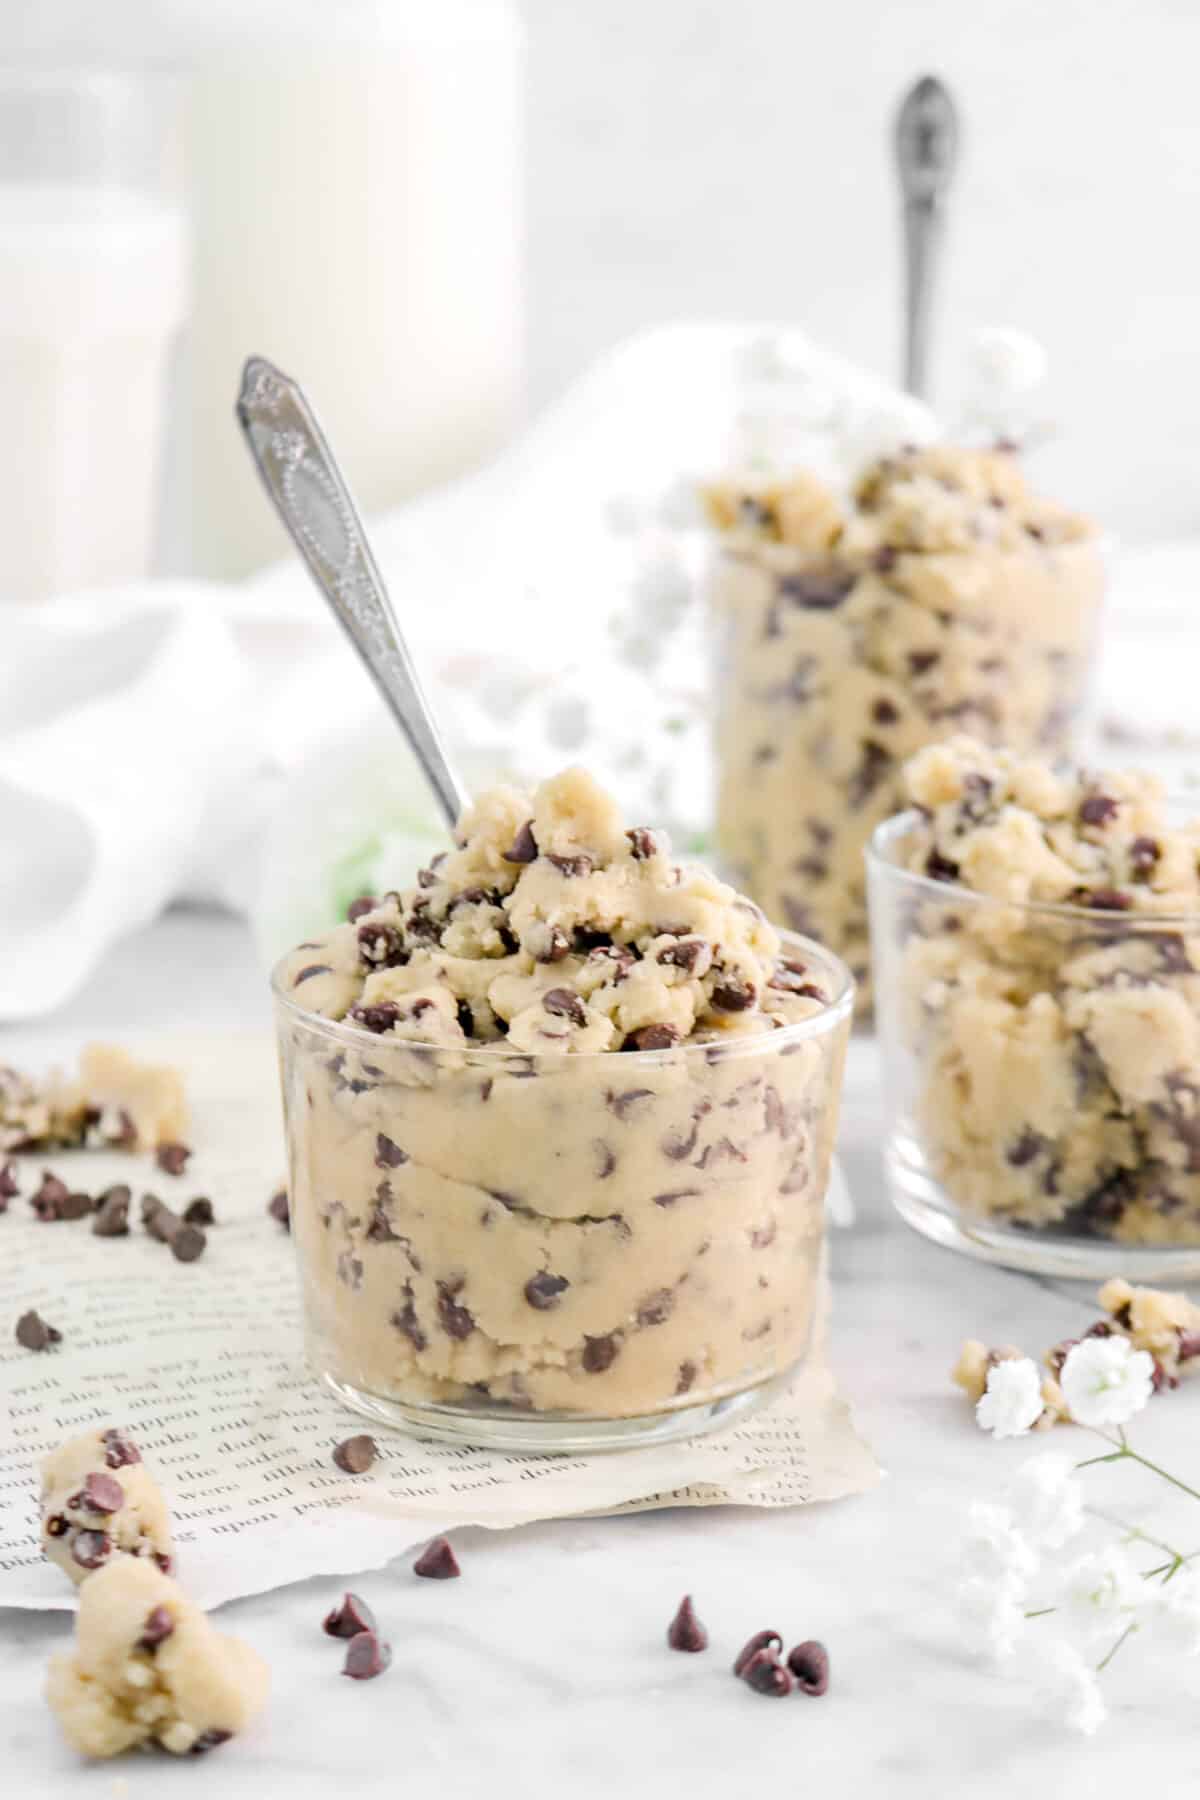 cookie dough in a small glass with spoon inside on book pages